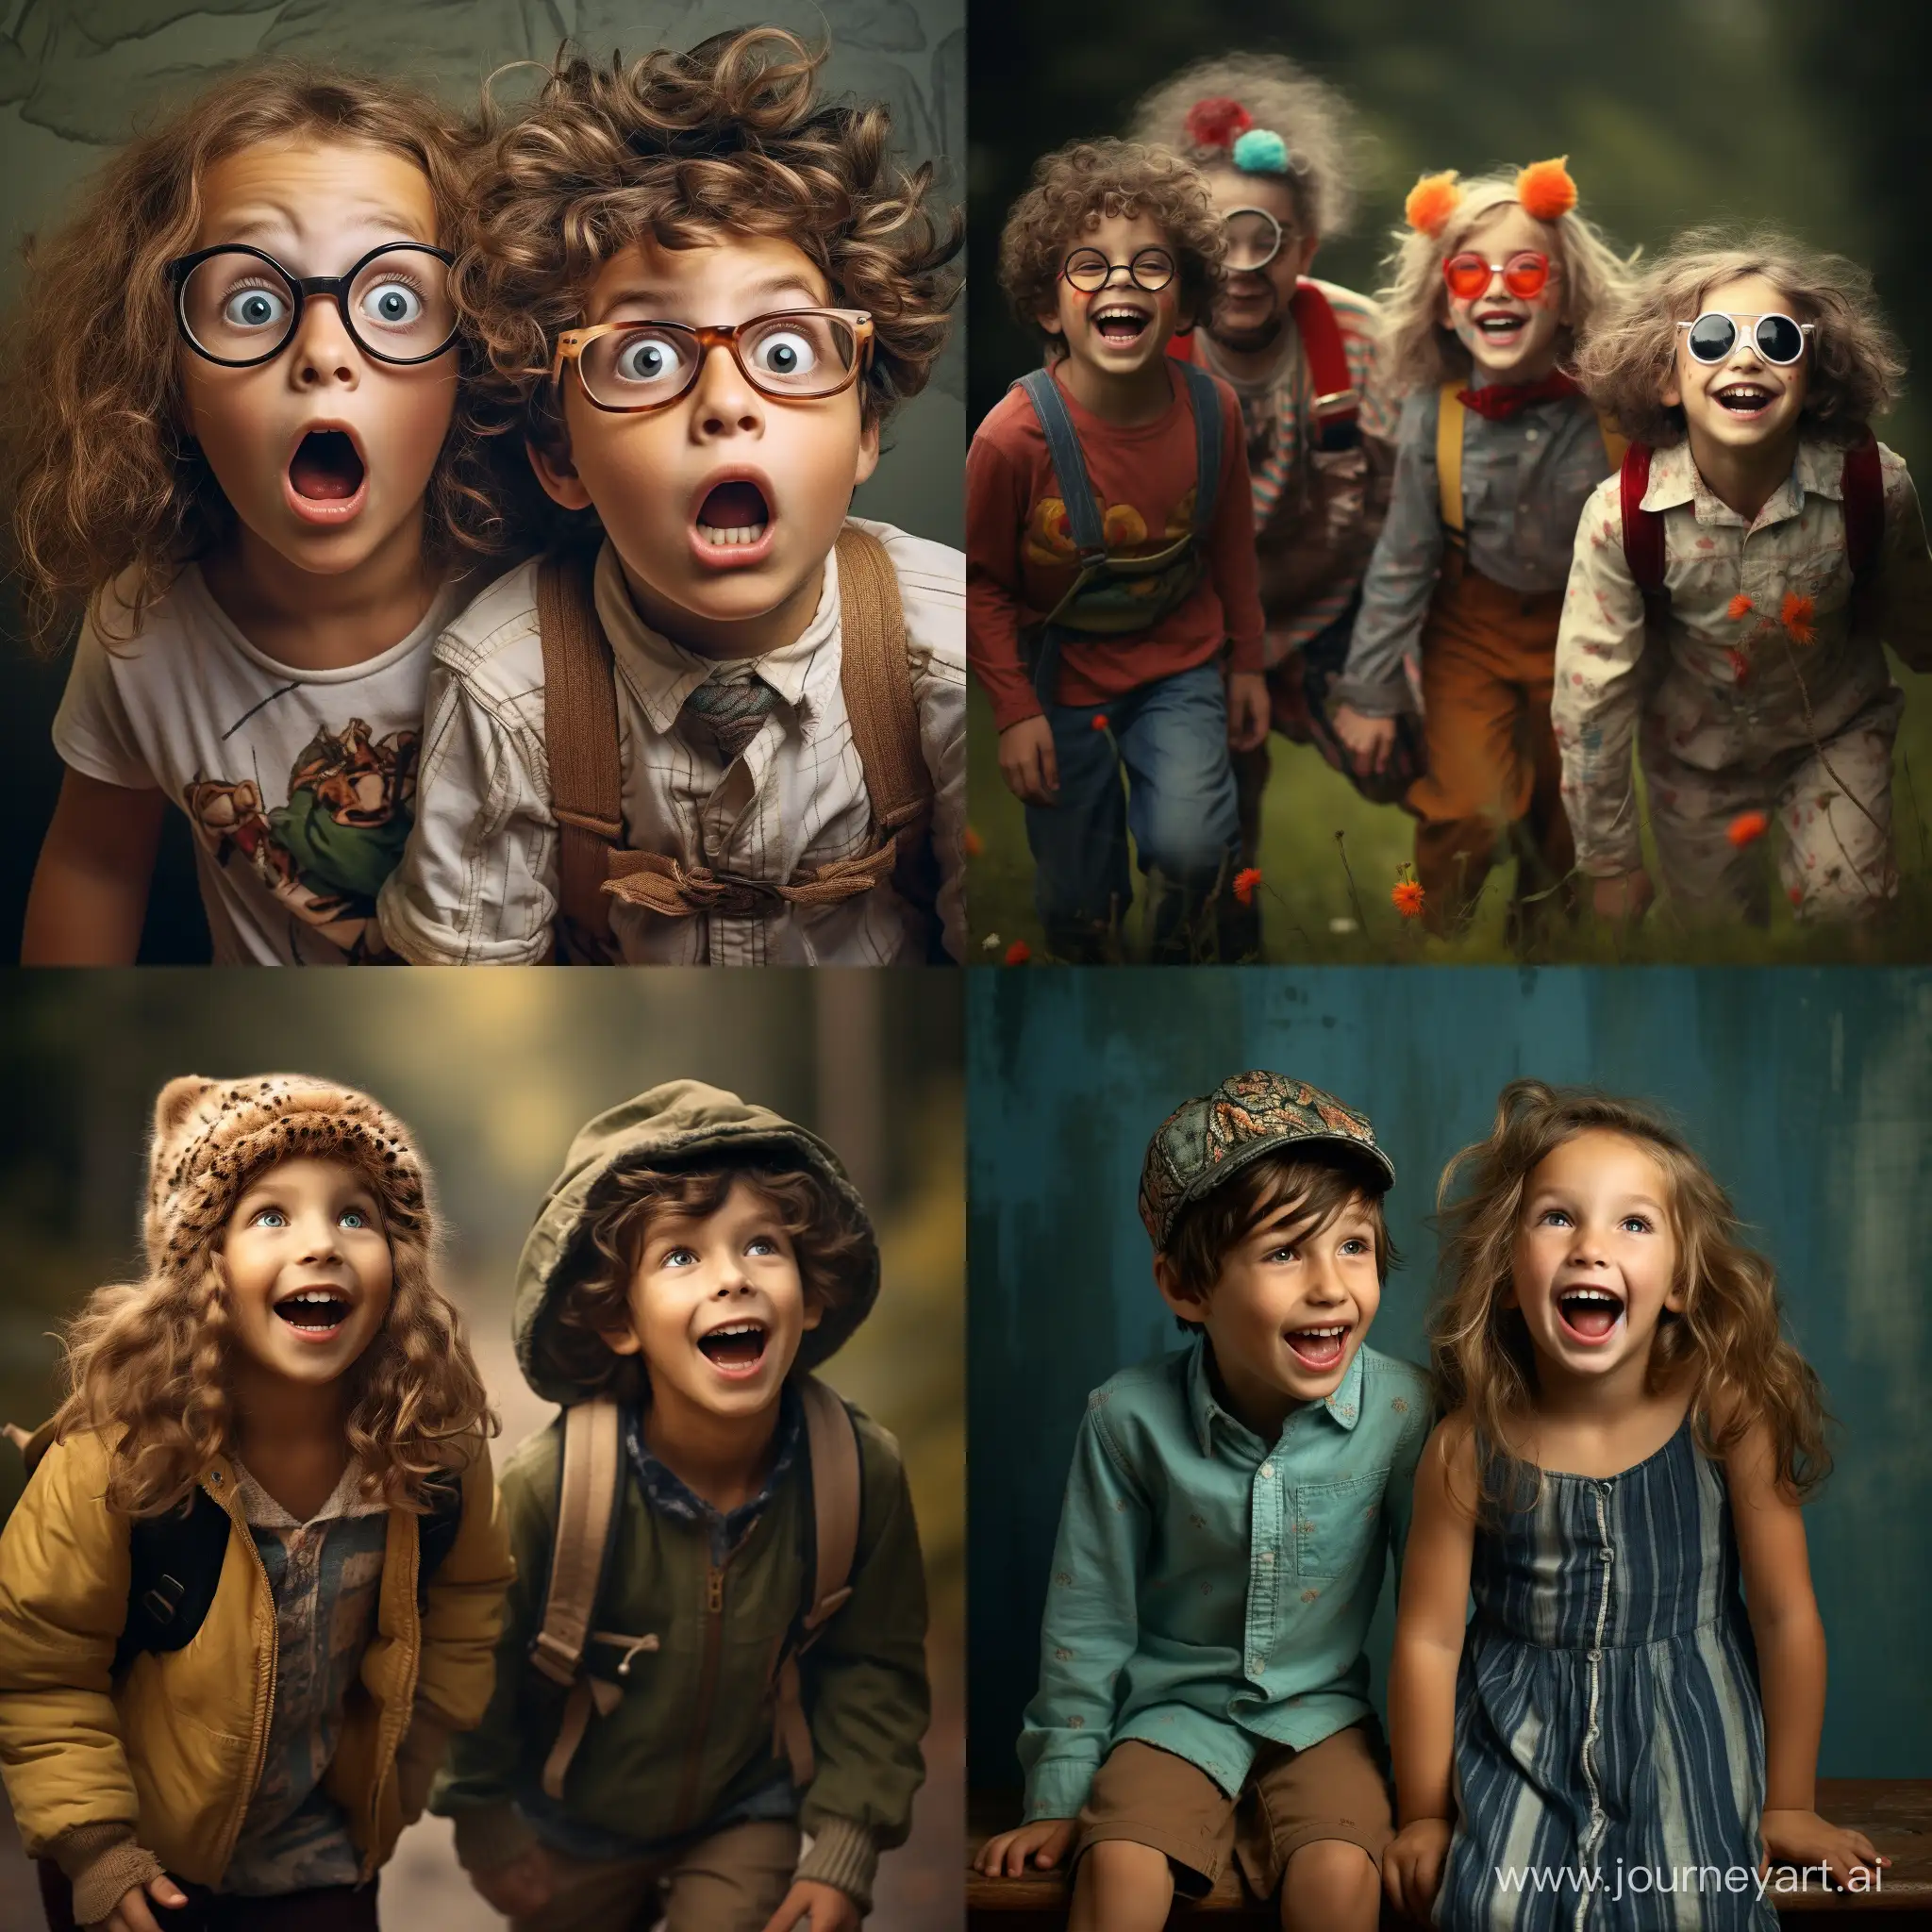 Hilarious-Childrens-Playtime-Captured-in-a-Whimsical-Scene